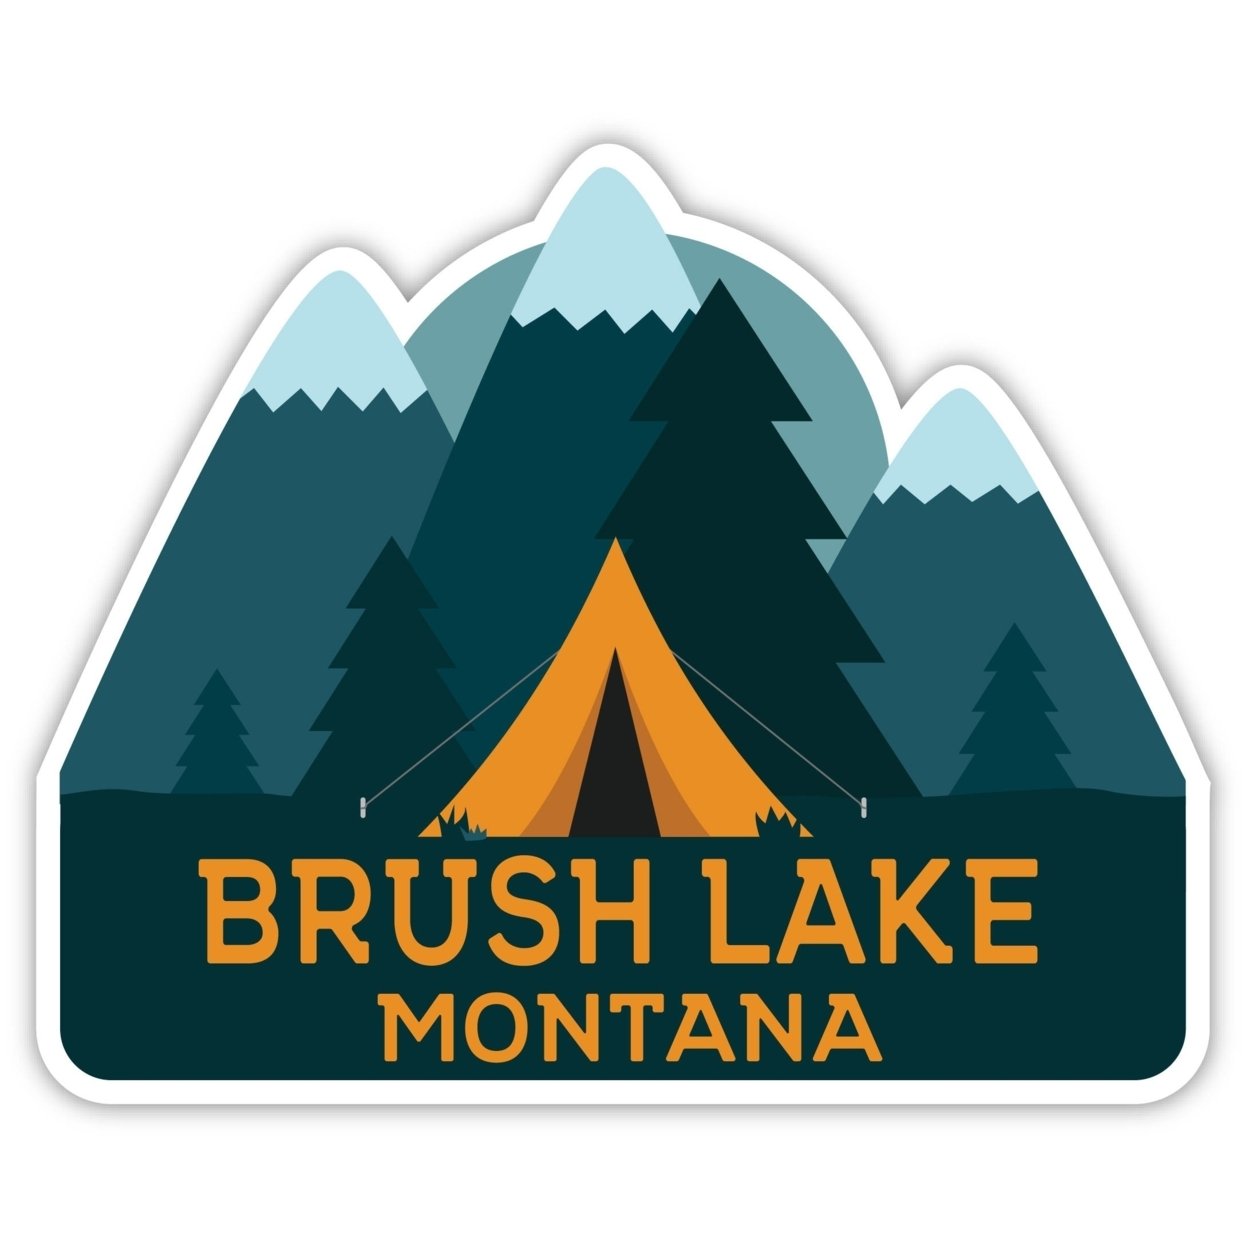 Brush Lake Montana Souvenir Decorative Stickers (Choose Theme And Size) - 4-Pack, 10-Inch, Tent